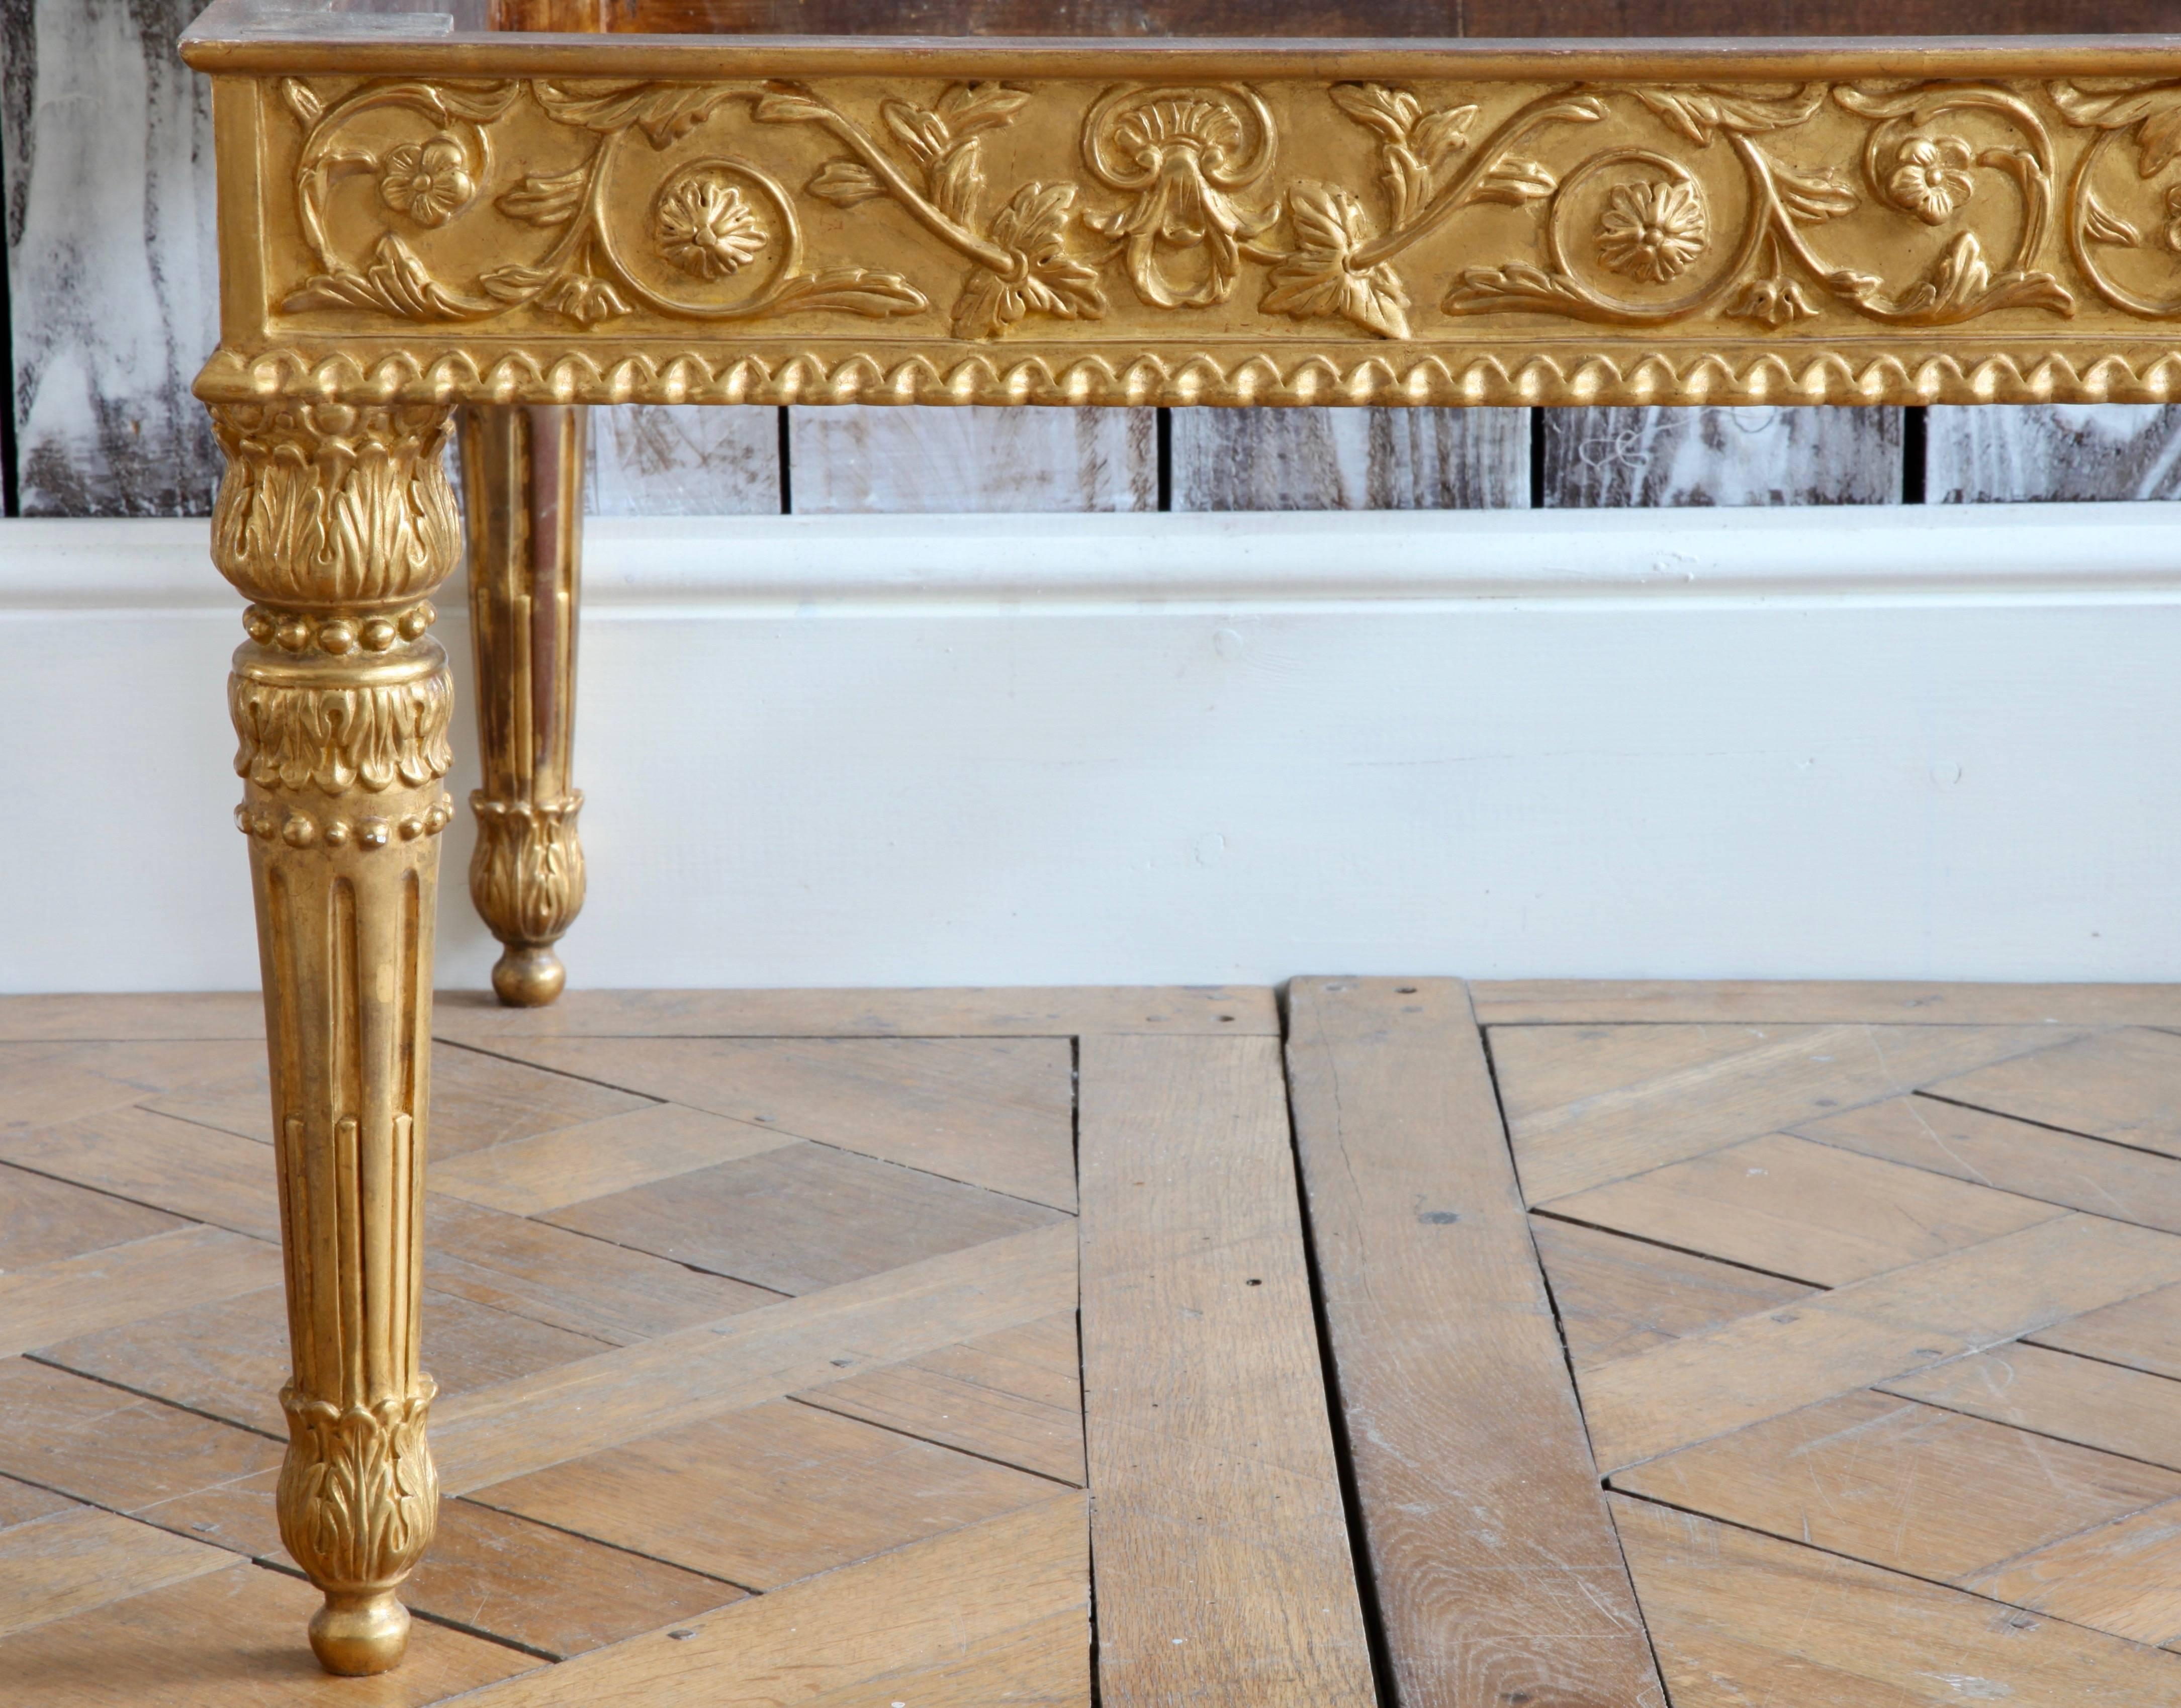 Louis XVI style giltwood coffee table
We can supply marble, glass, or bespoke top on demand.
 